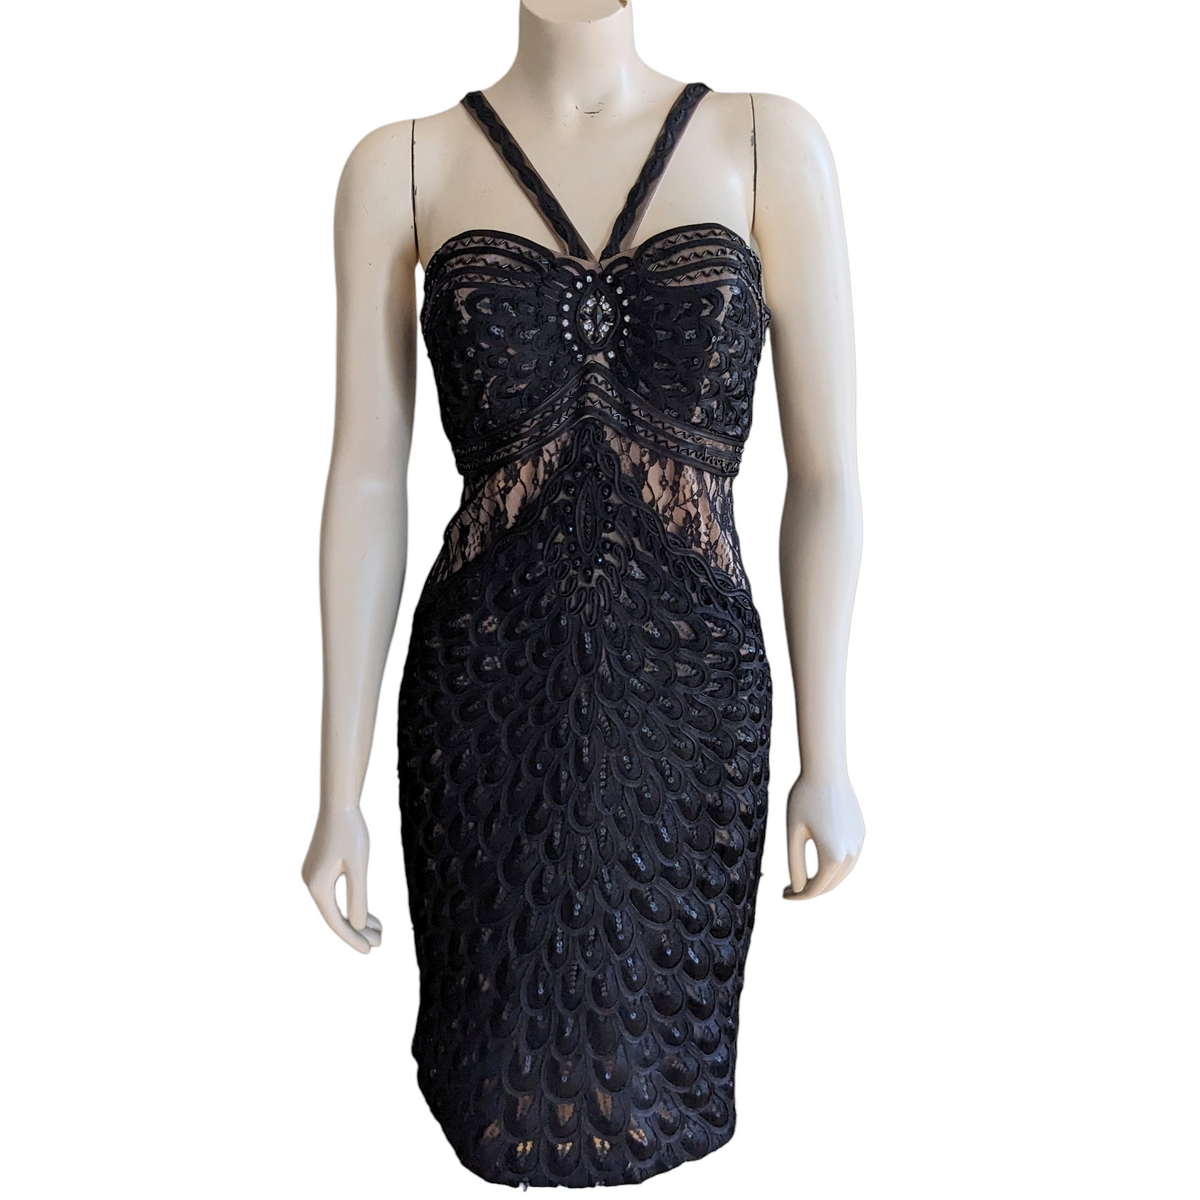 Sue Wong Black Beaded Cocktail Dress Size 6 by C&J Collections